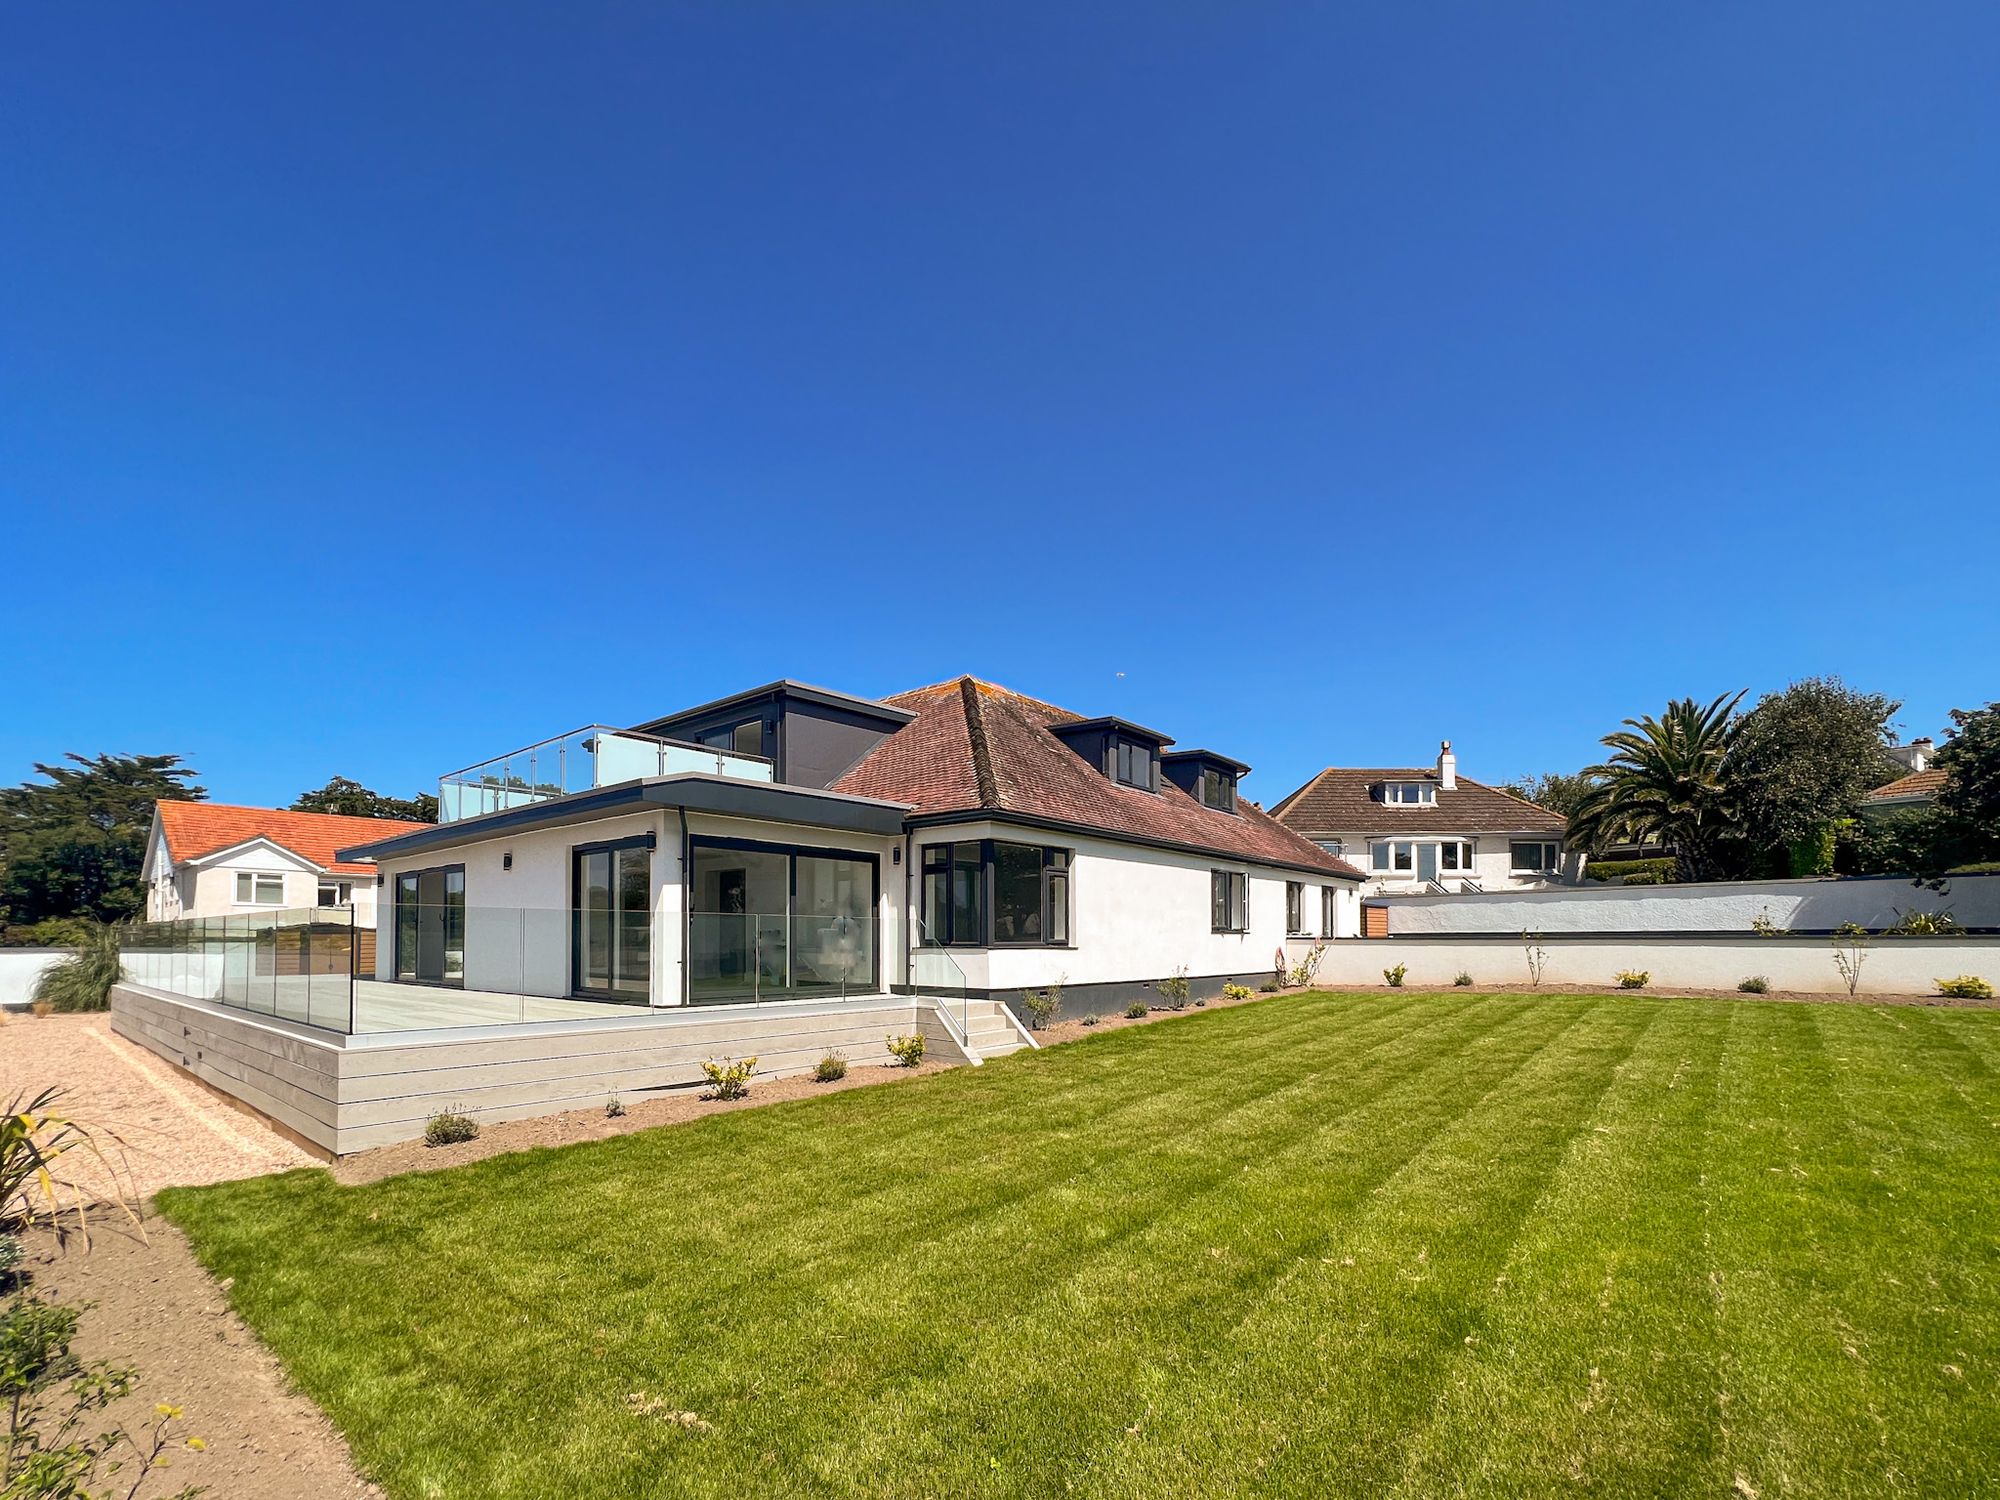 5 bed Property For Sale in Jersey, Jersey